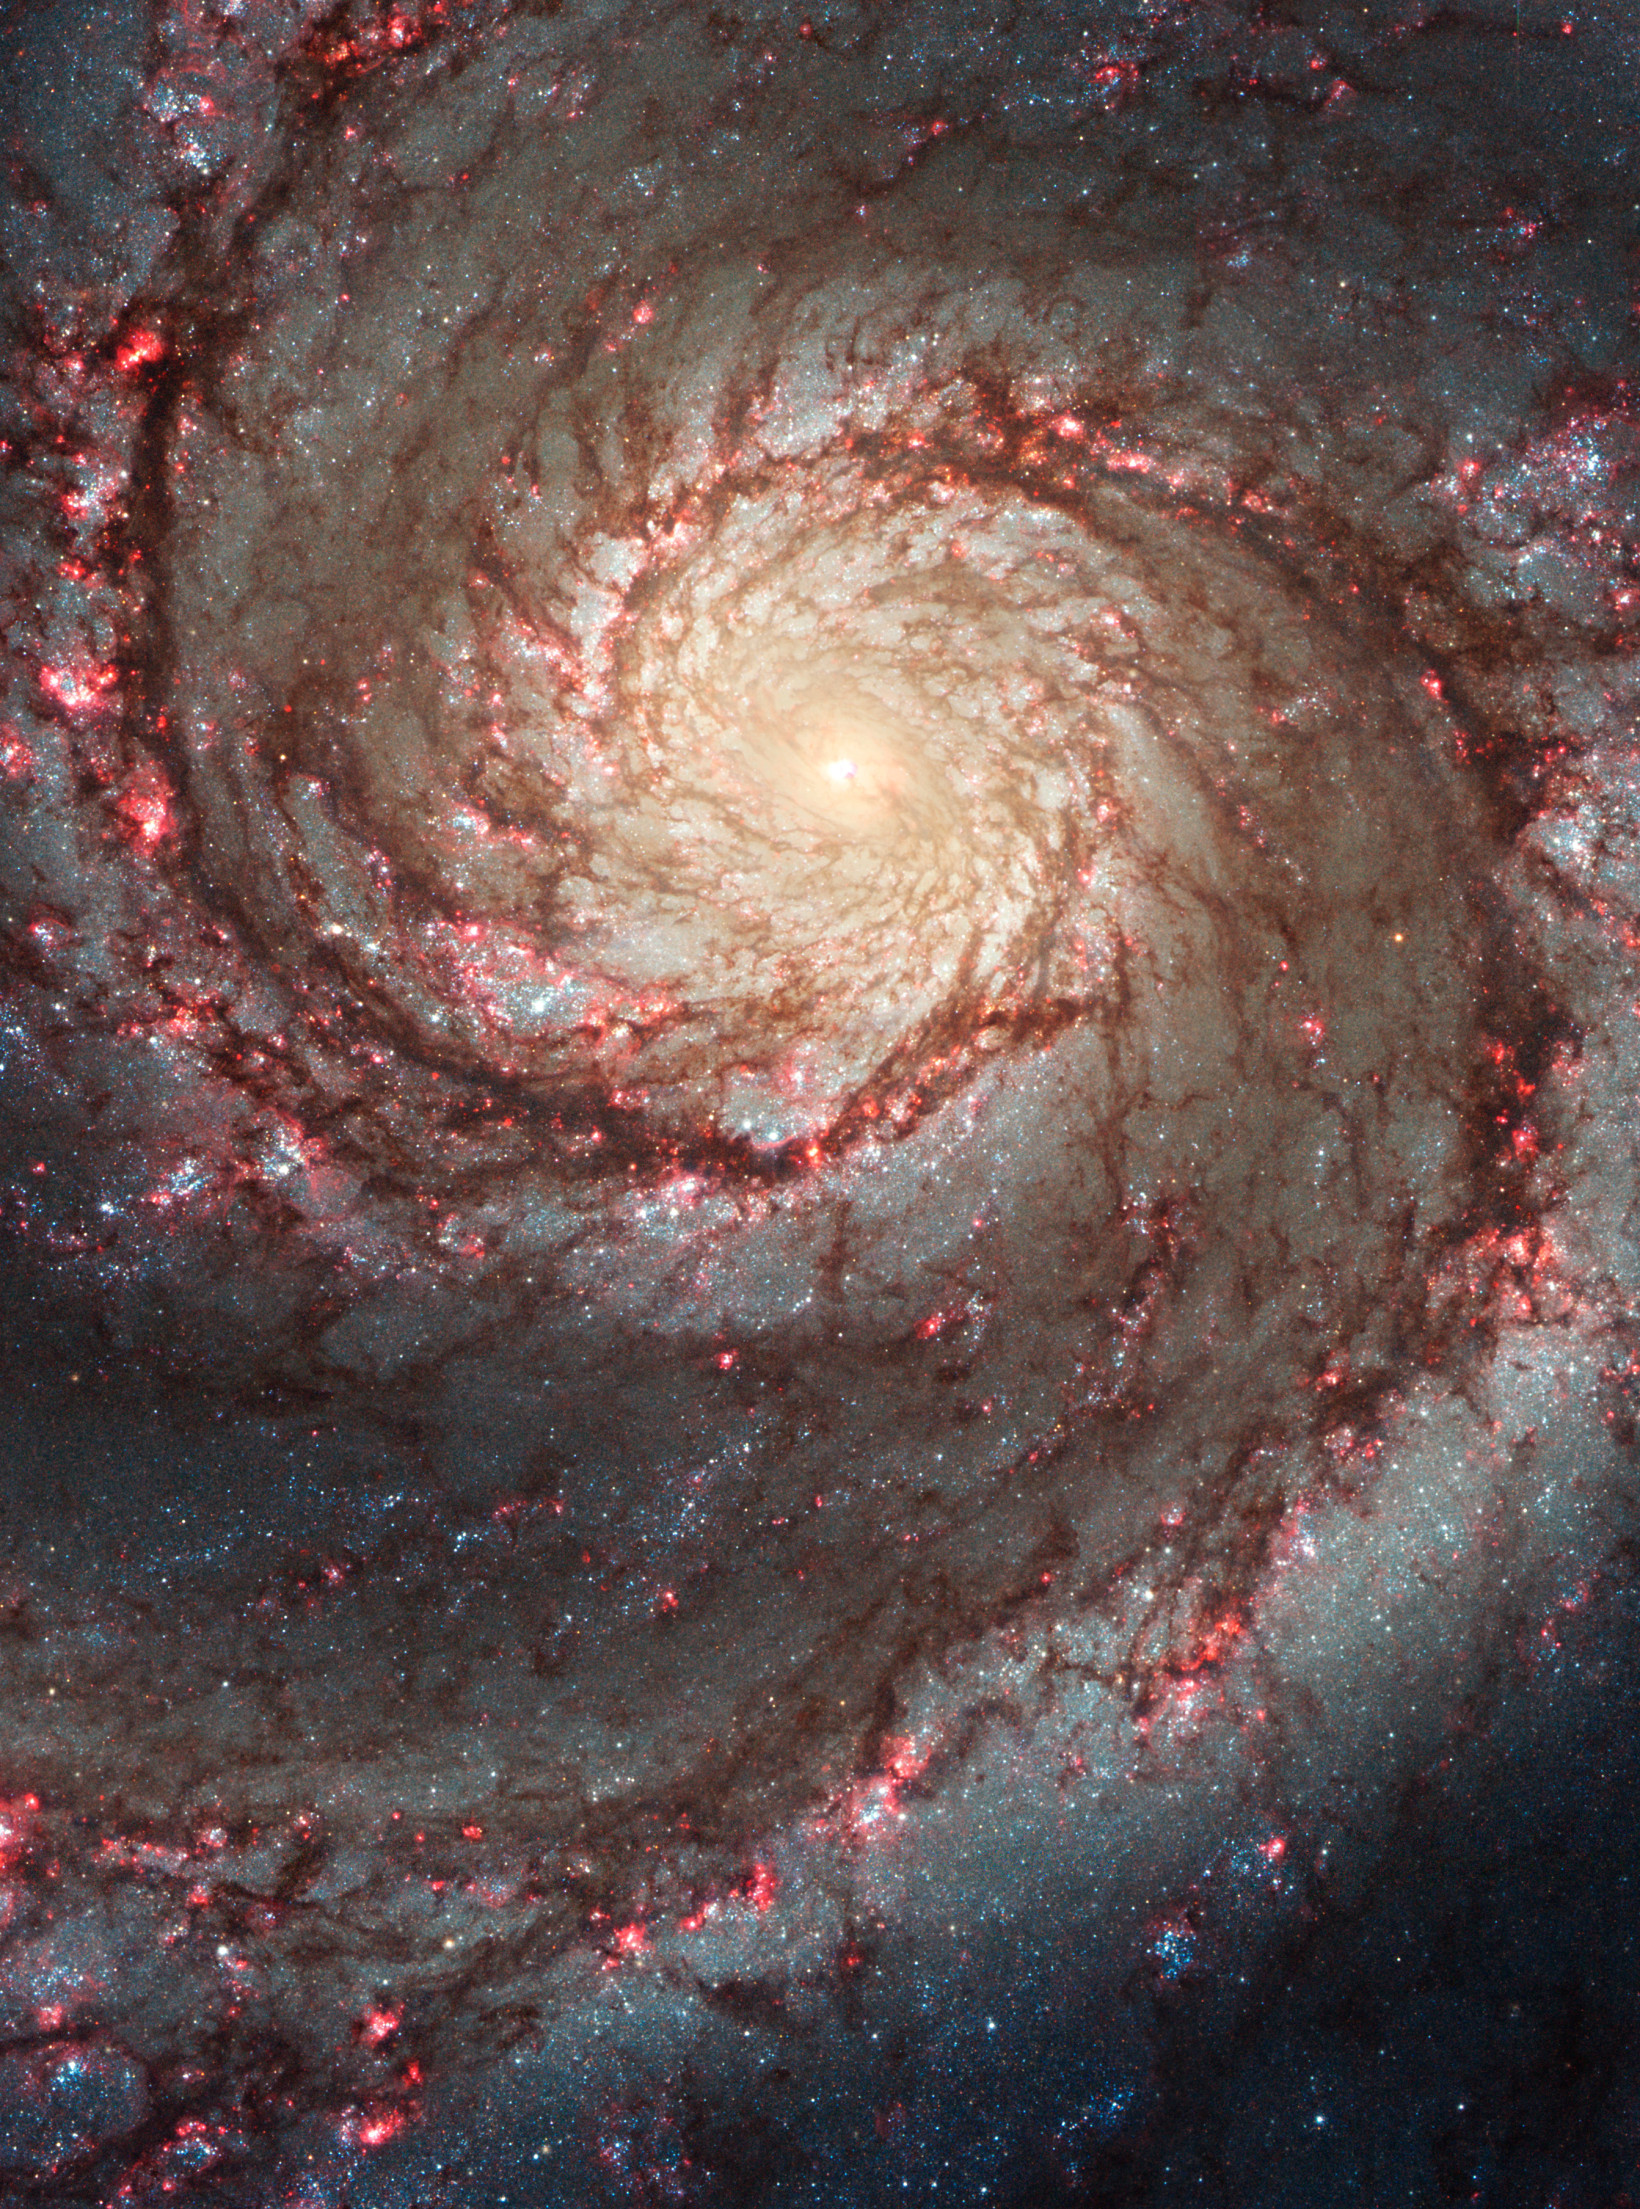 James Webb telescope captures clearest image ever of Whirlpool galaxy ...